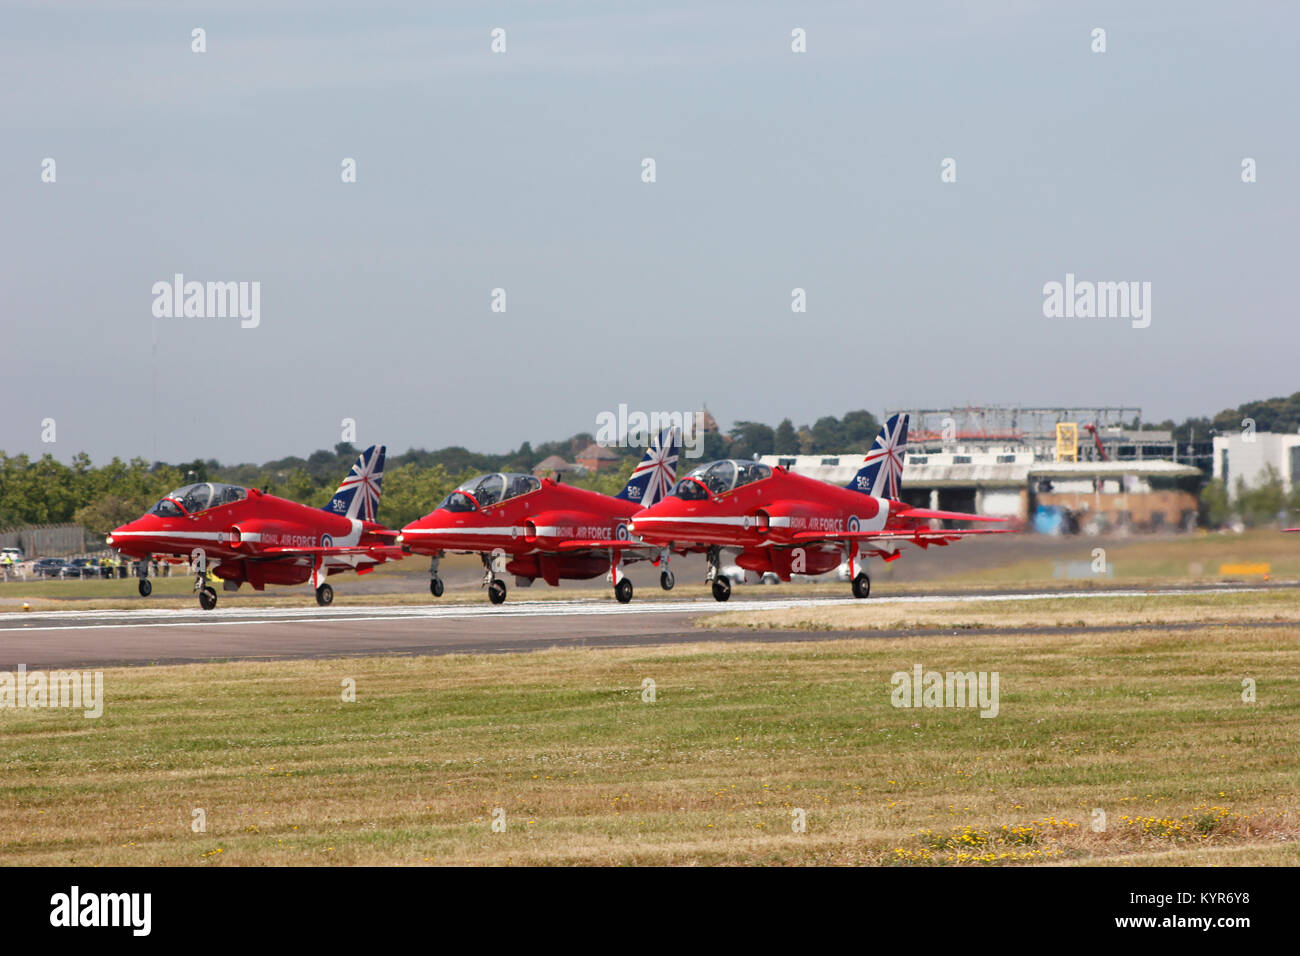 Red Arrows preparing for take off at Farnborough Airshow 2014 Stock Photo